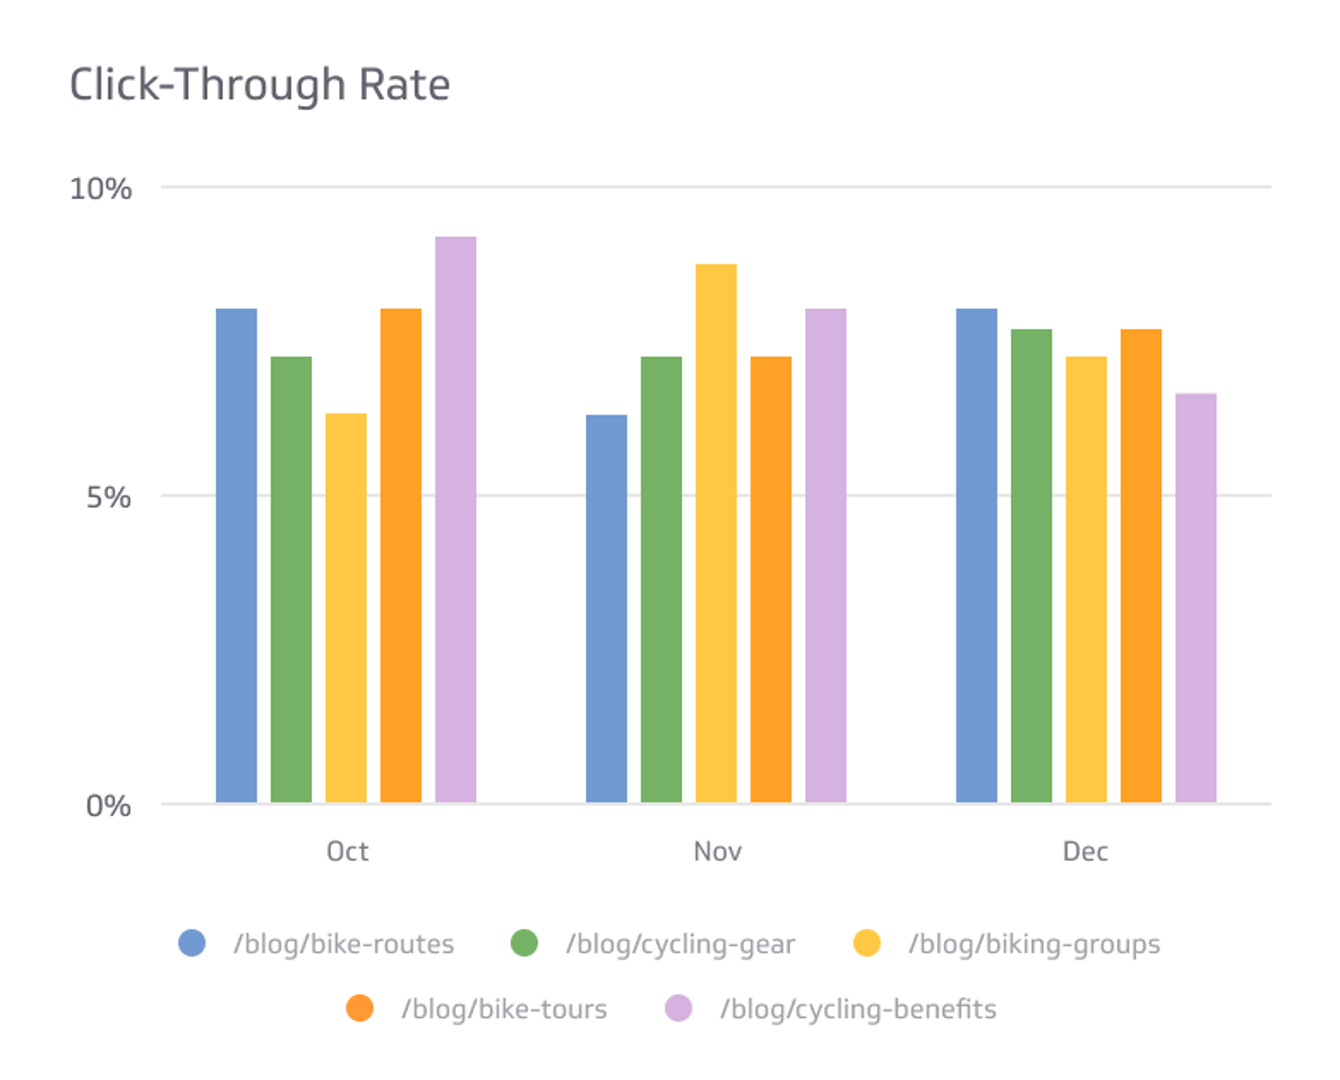 What is a Good CTR (Click-Through Rate)?